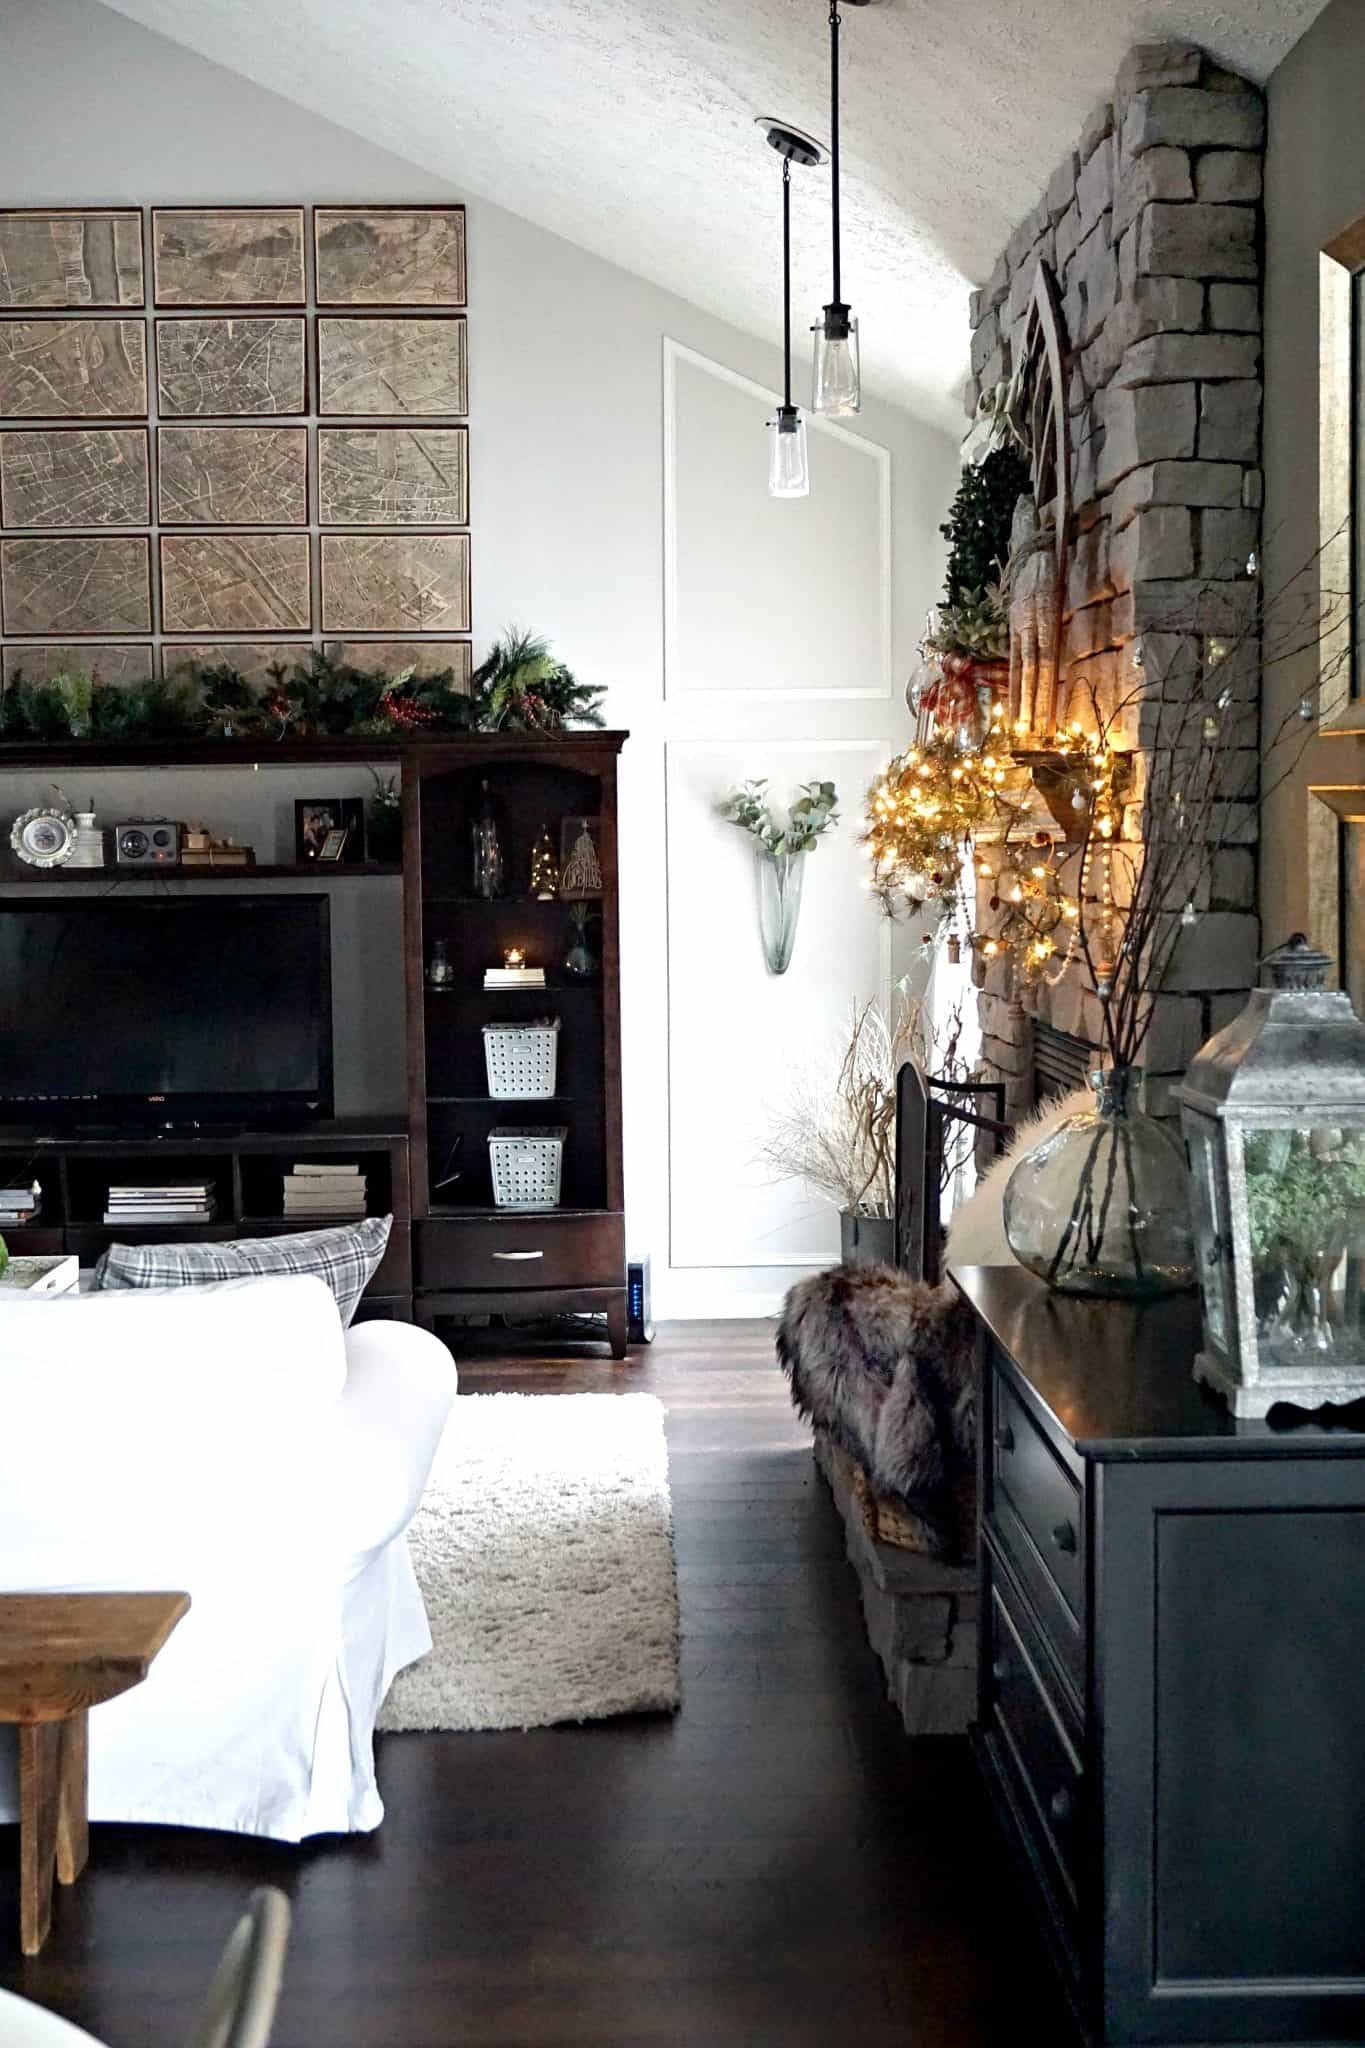 Modern Rustic Holiday Home Tour 2017 Right View of Paris Map